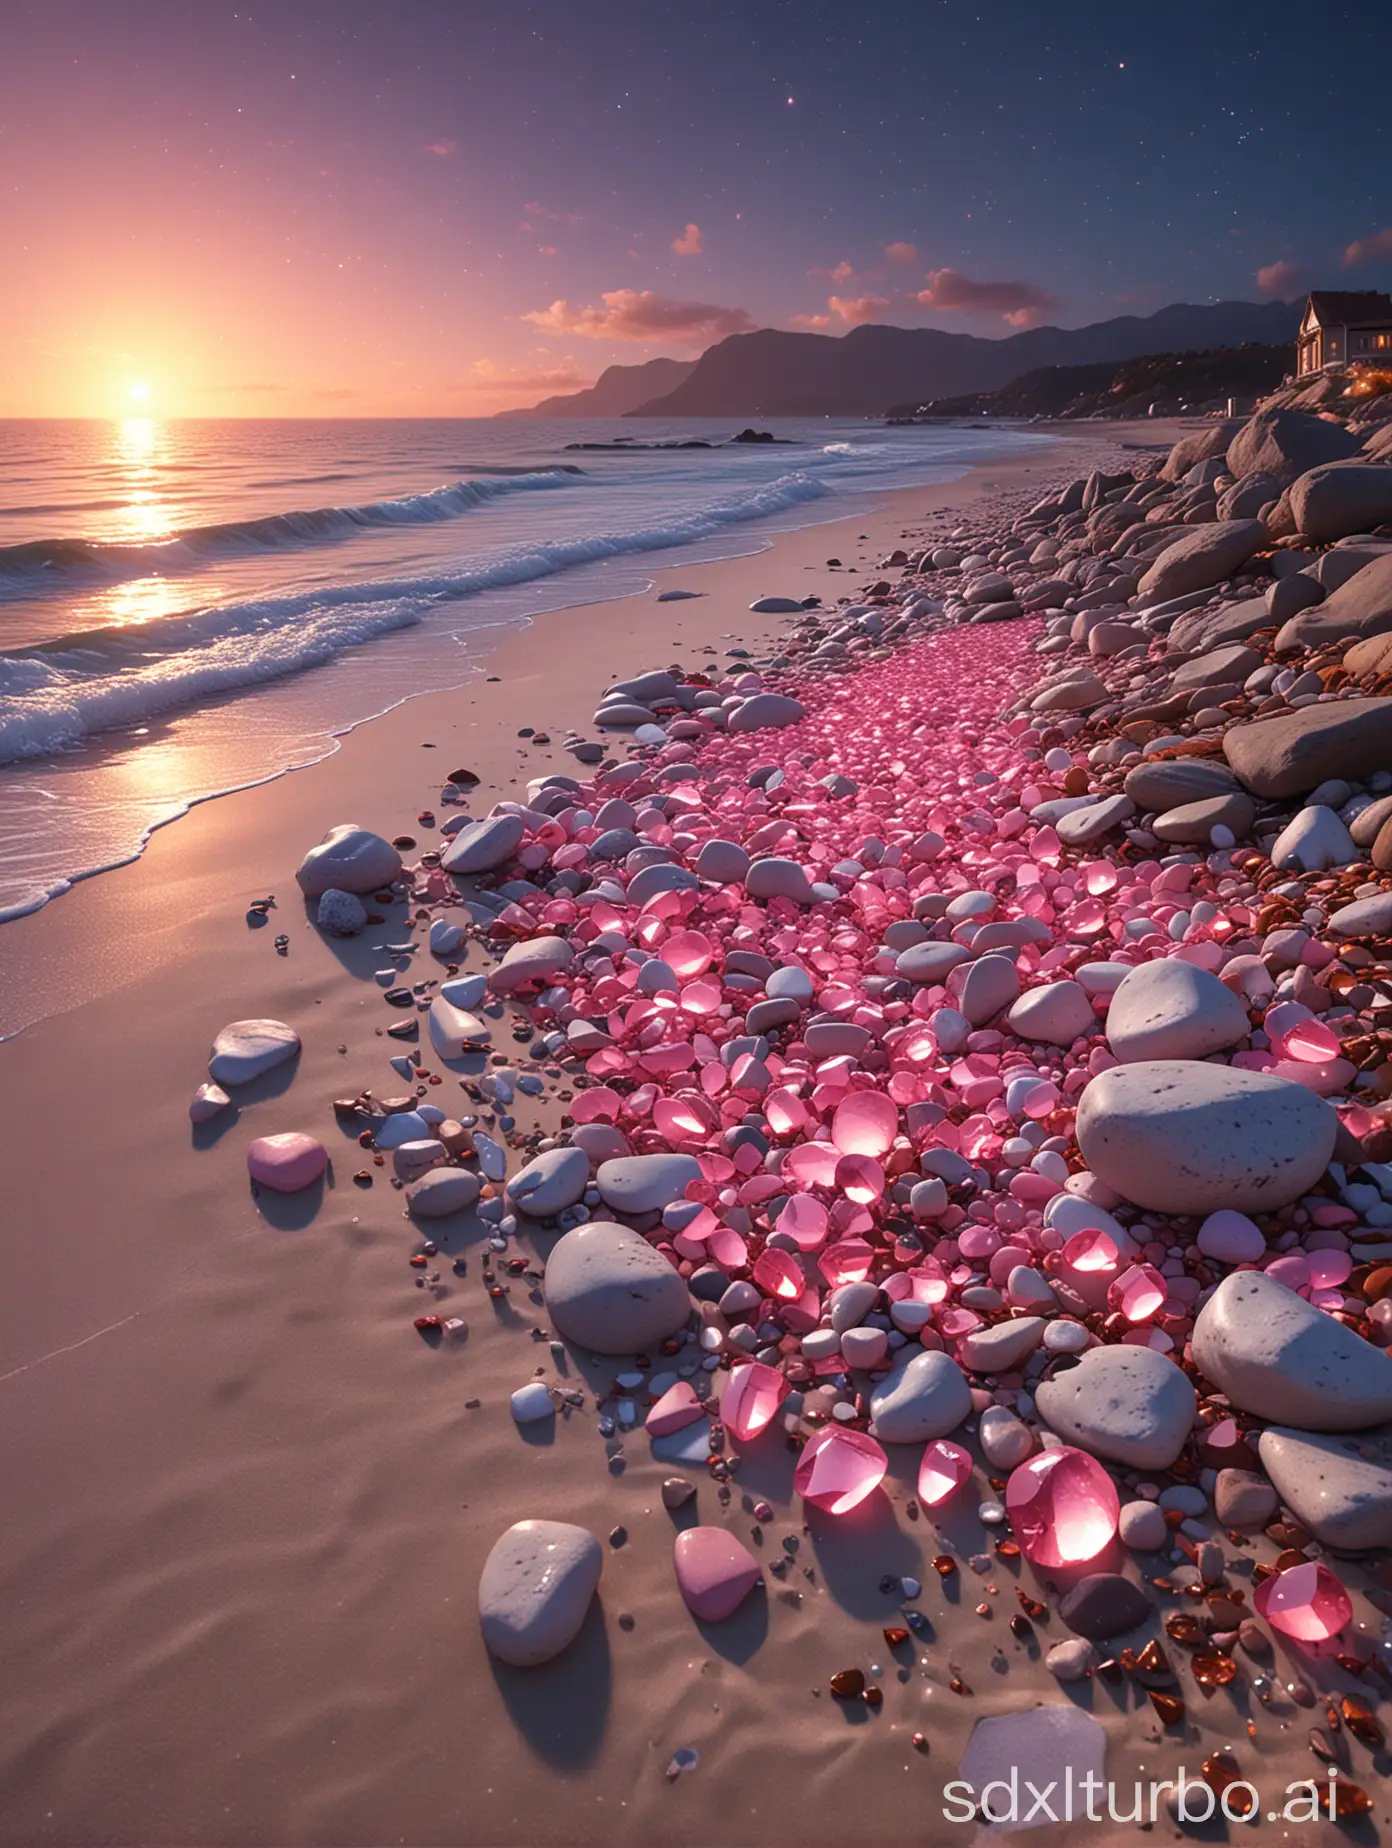 At night, in the sky and on the beach, large pink stones are piled up, round and full, clear and transparent, smooth and transparent, crystal clear, pure in color and transparent. On the beach, a champagne-coloured path with diamonds glitters leads to Crescent Bay, surrounded by several colourful gemstones. Dream Engine, Epic Rendering, Ultra HD, Ultra Wide Angle, Art Station,